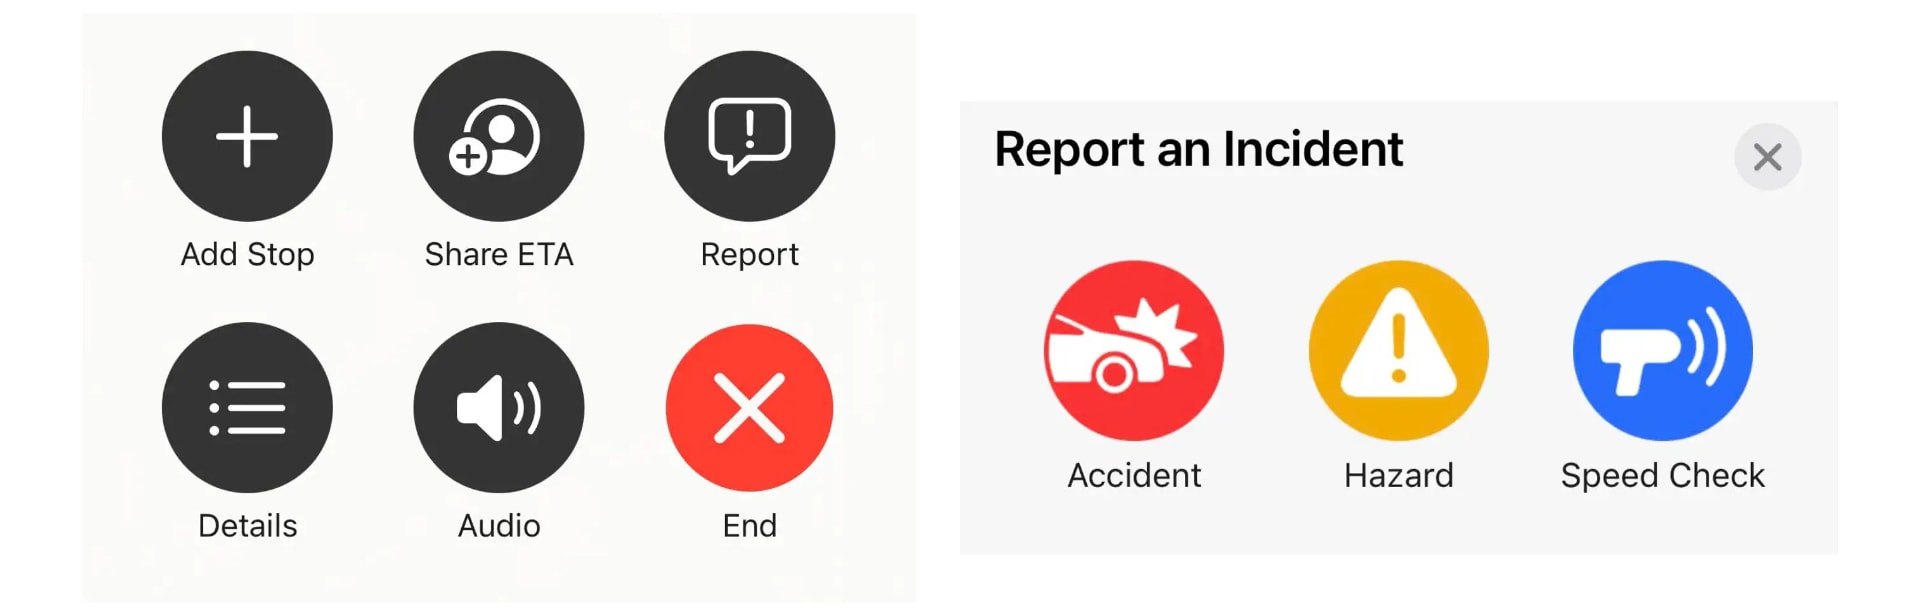 report incidents in Apple Maps